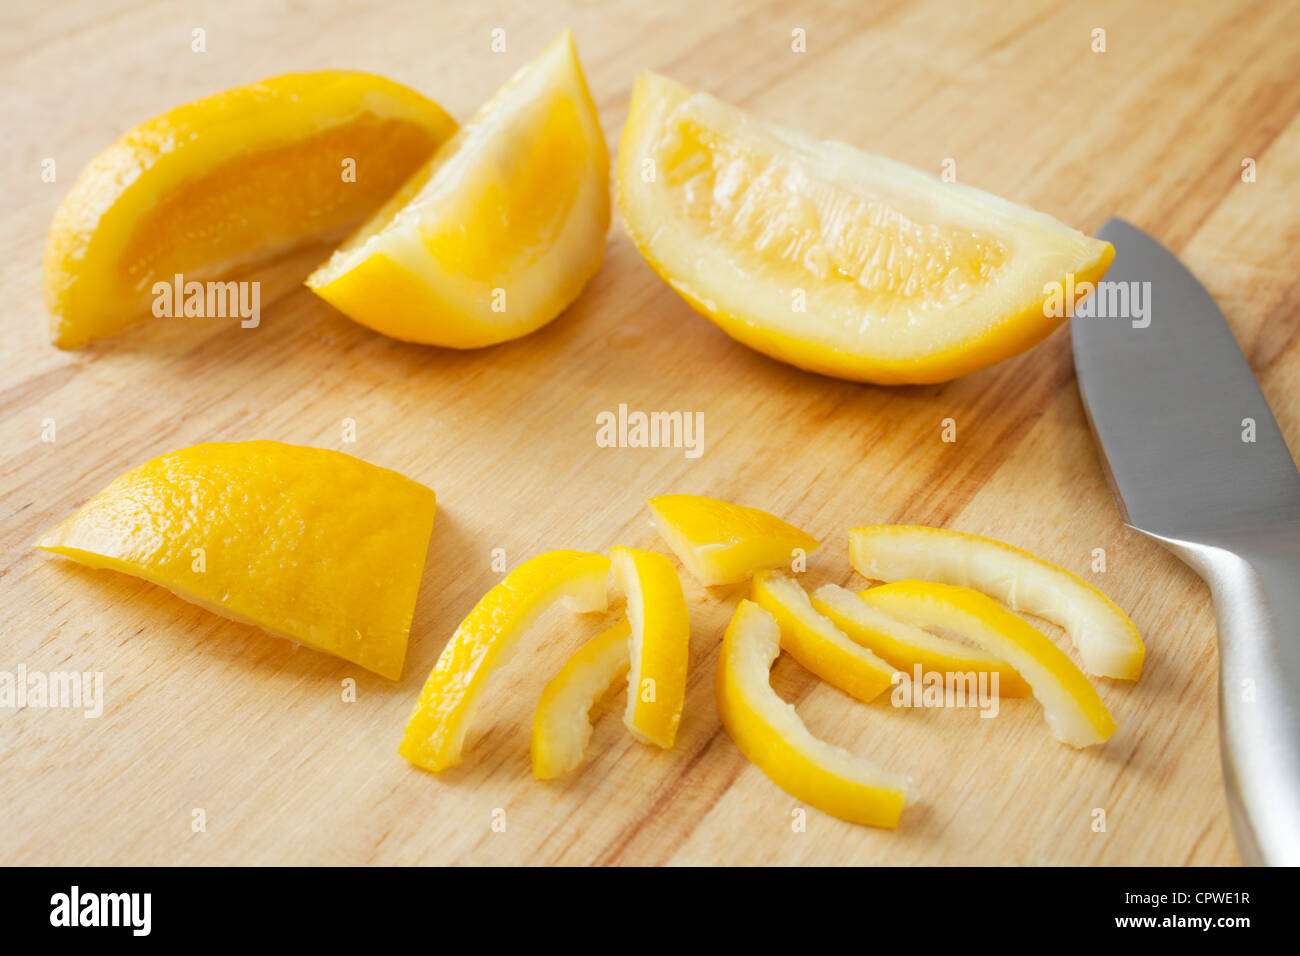 Preserved lemon, staple of Moroccan cuisine, on a chopping board. Stock Photo